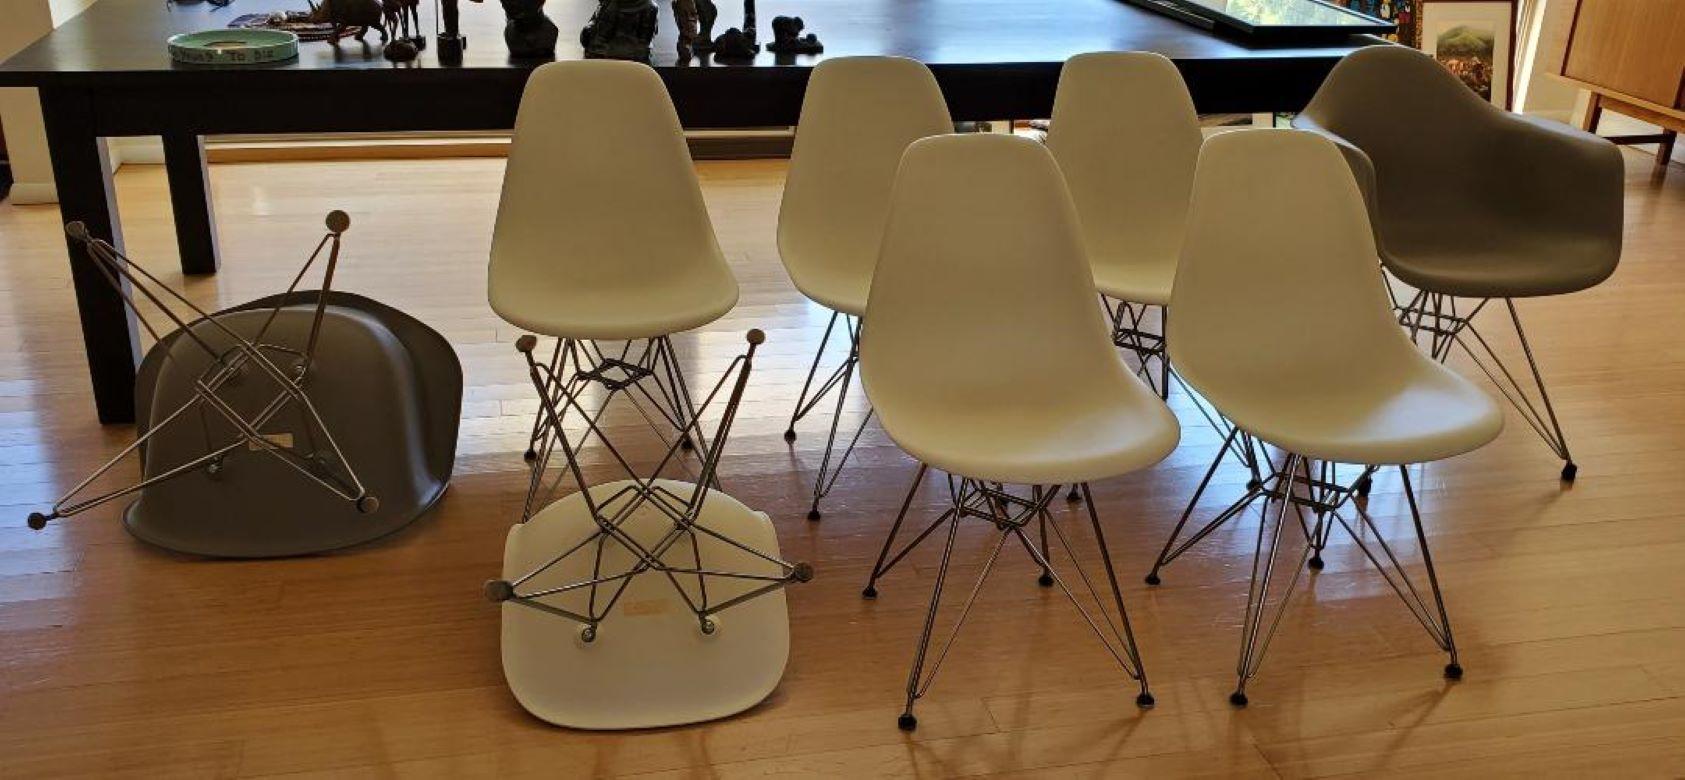 8 Eames Chairs Eiffel Tower 2 DAR Arm Chairs 6 DSR Side Chairs by Herman Miller 2